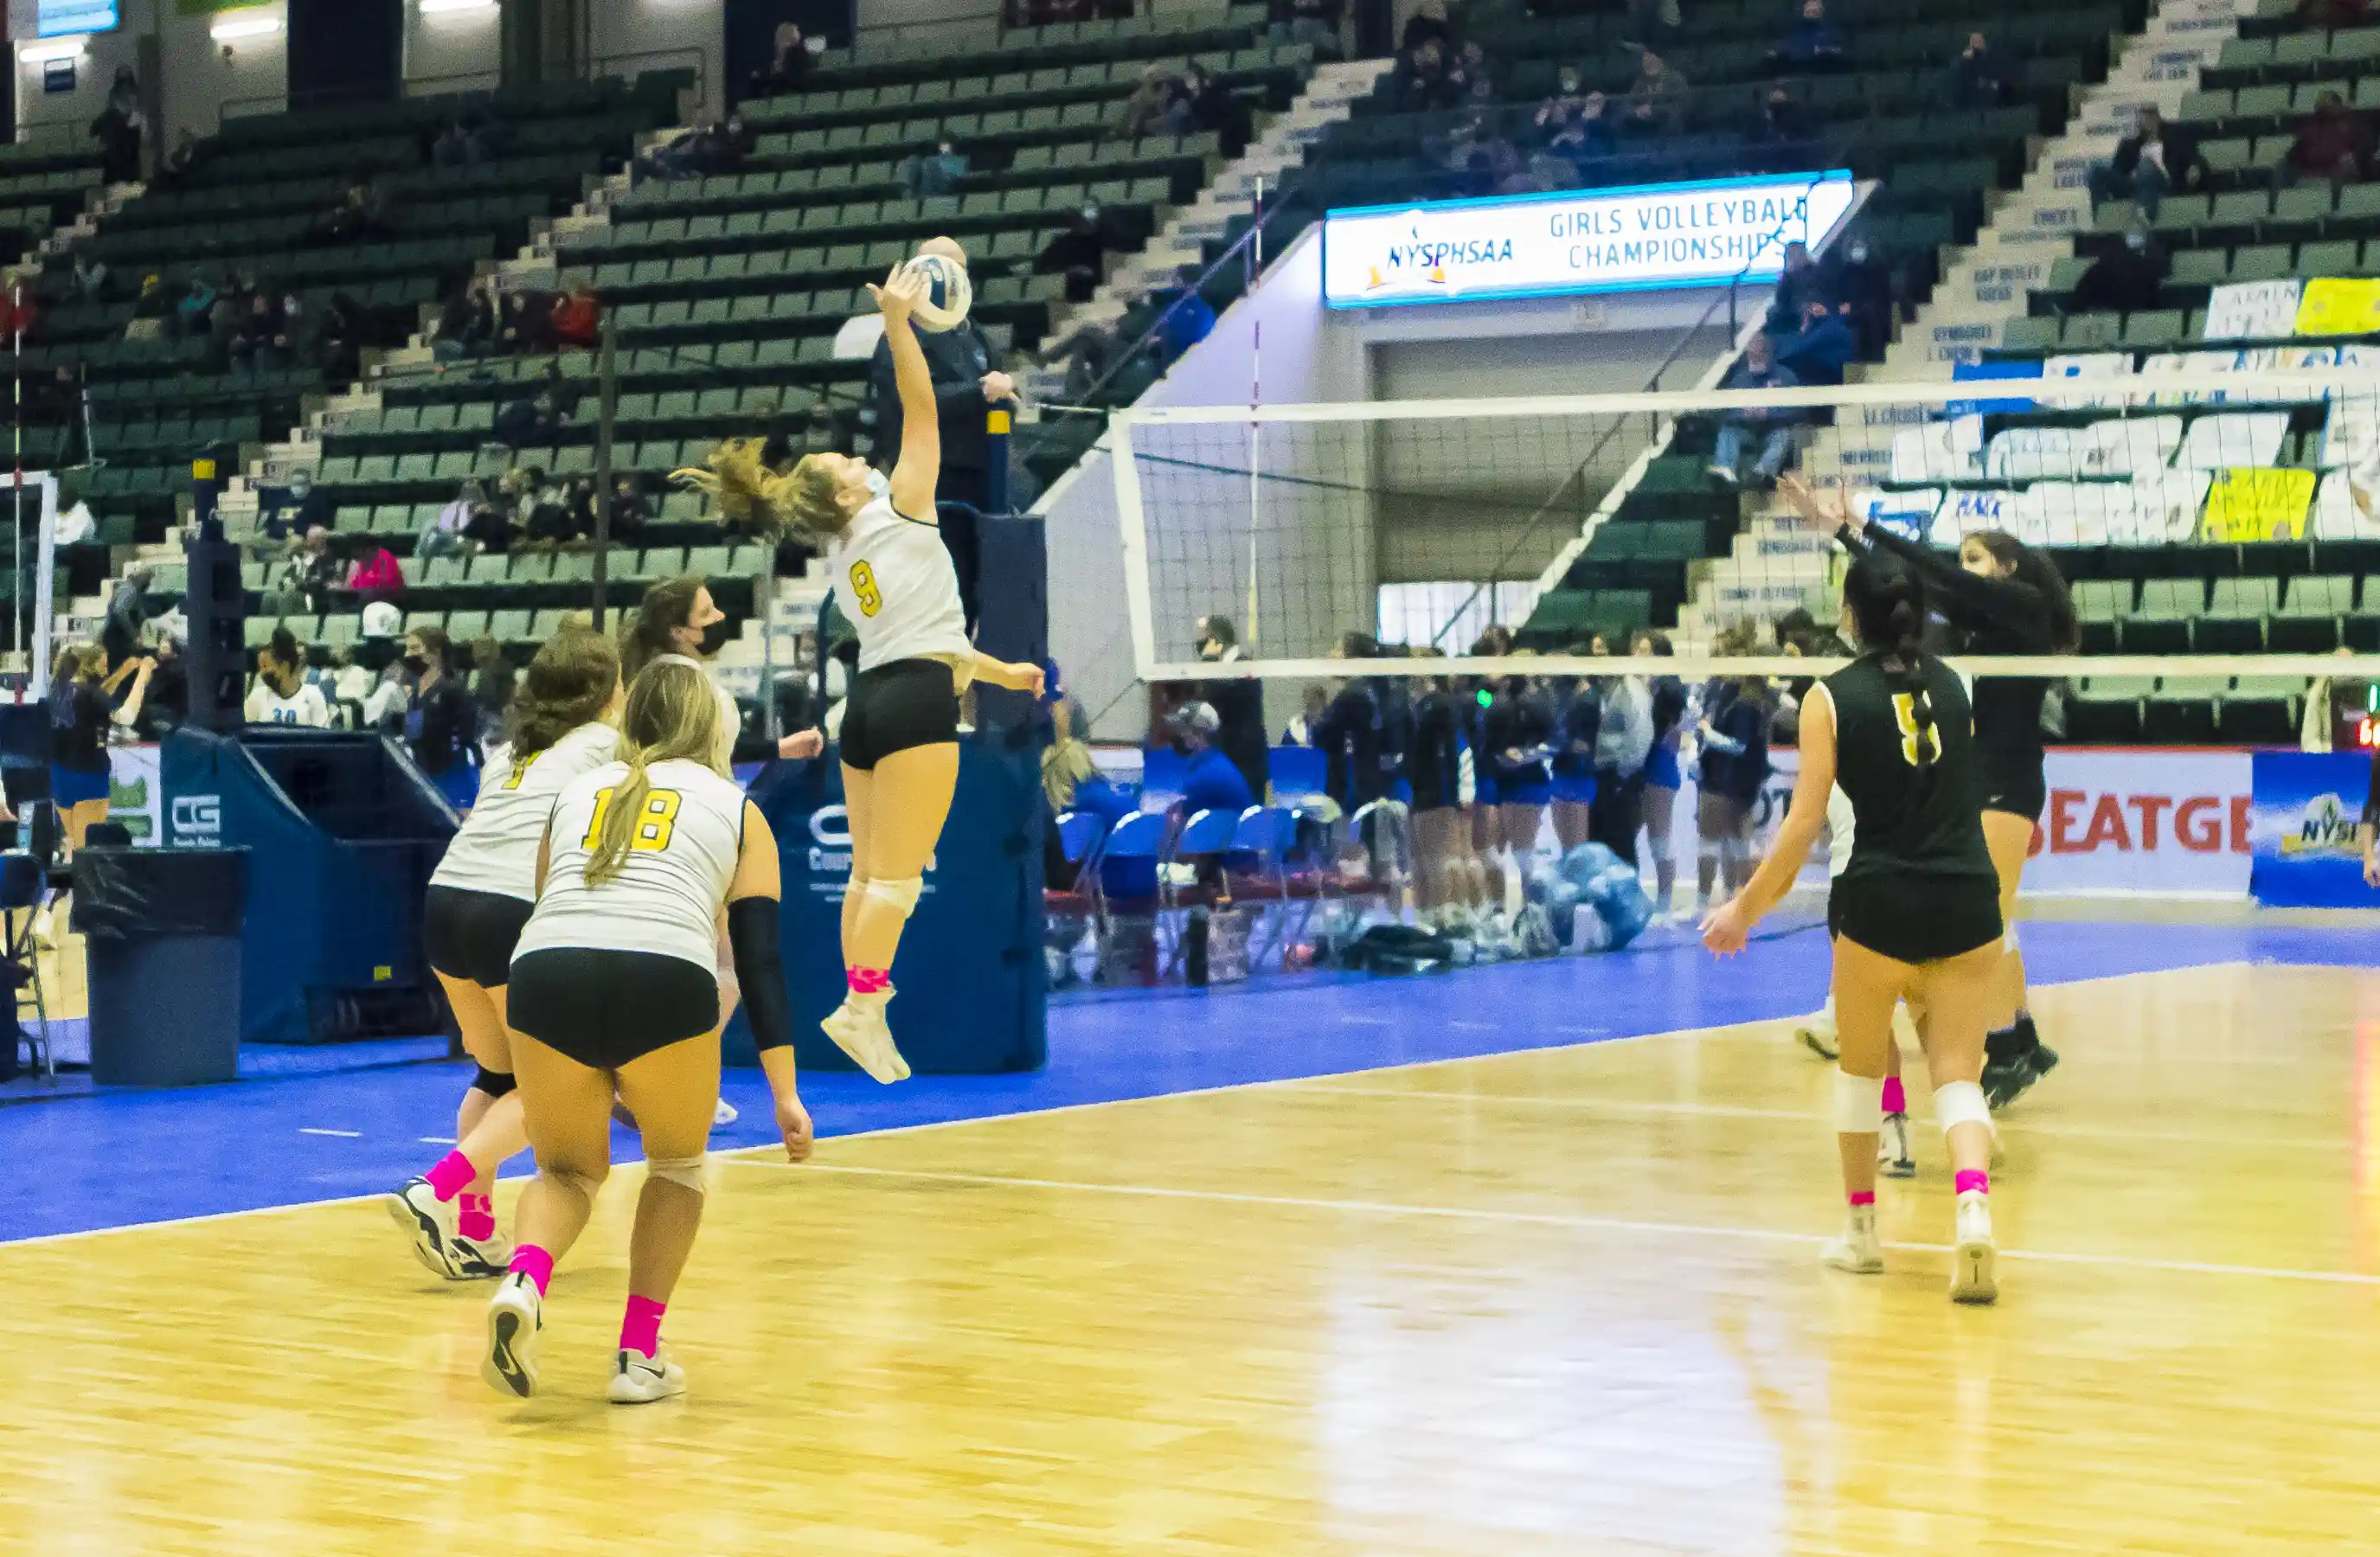 Girls Volleyball Championship Returns to Cool Insuring Arena